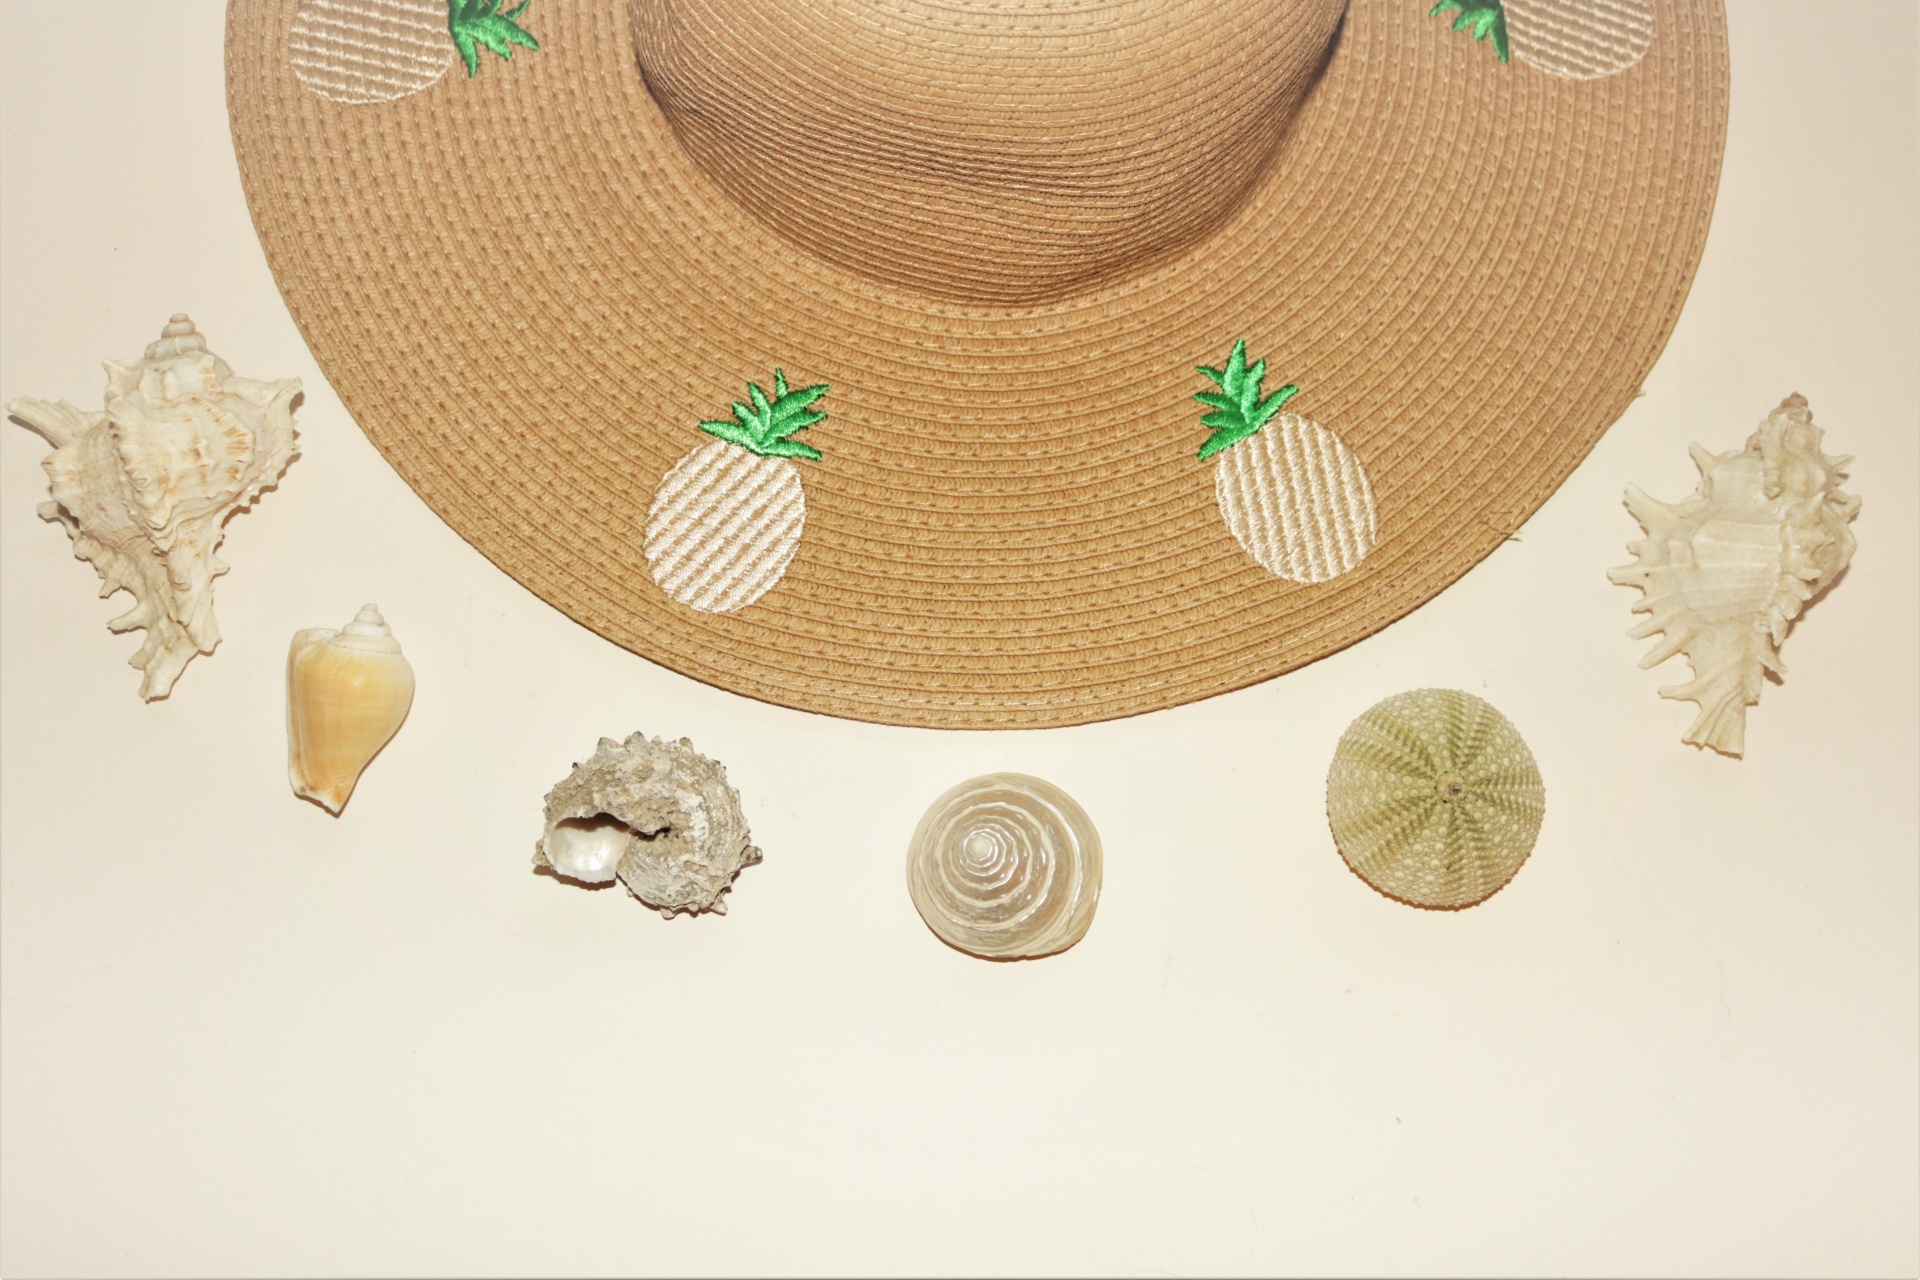 Sea Shells And Straw Hat On White